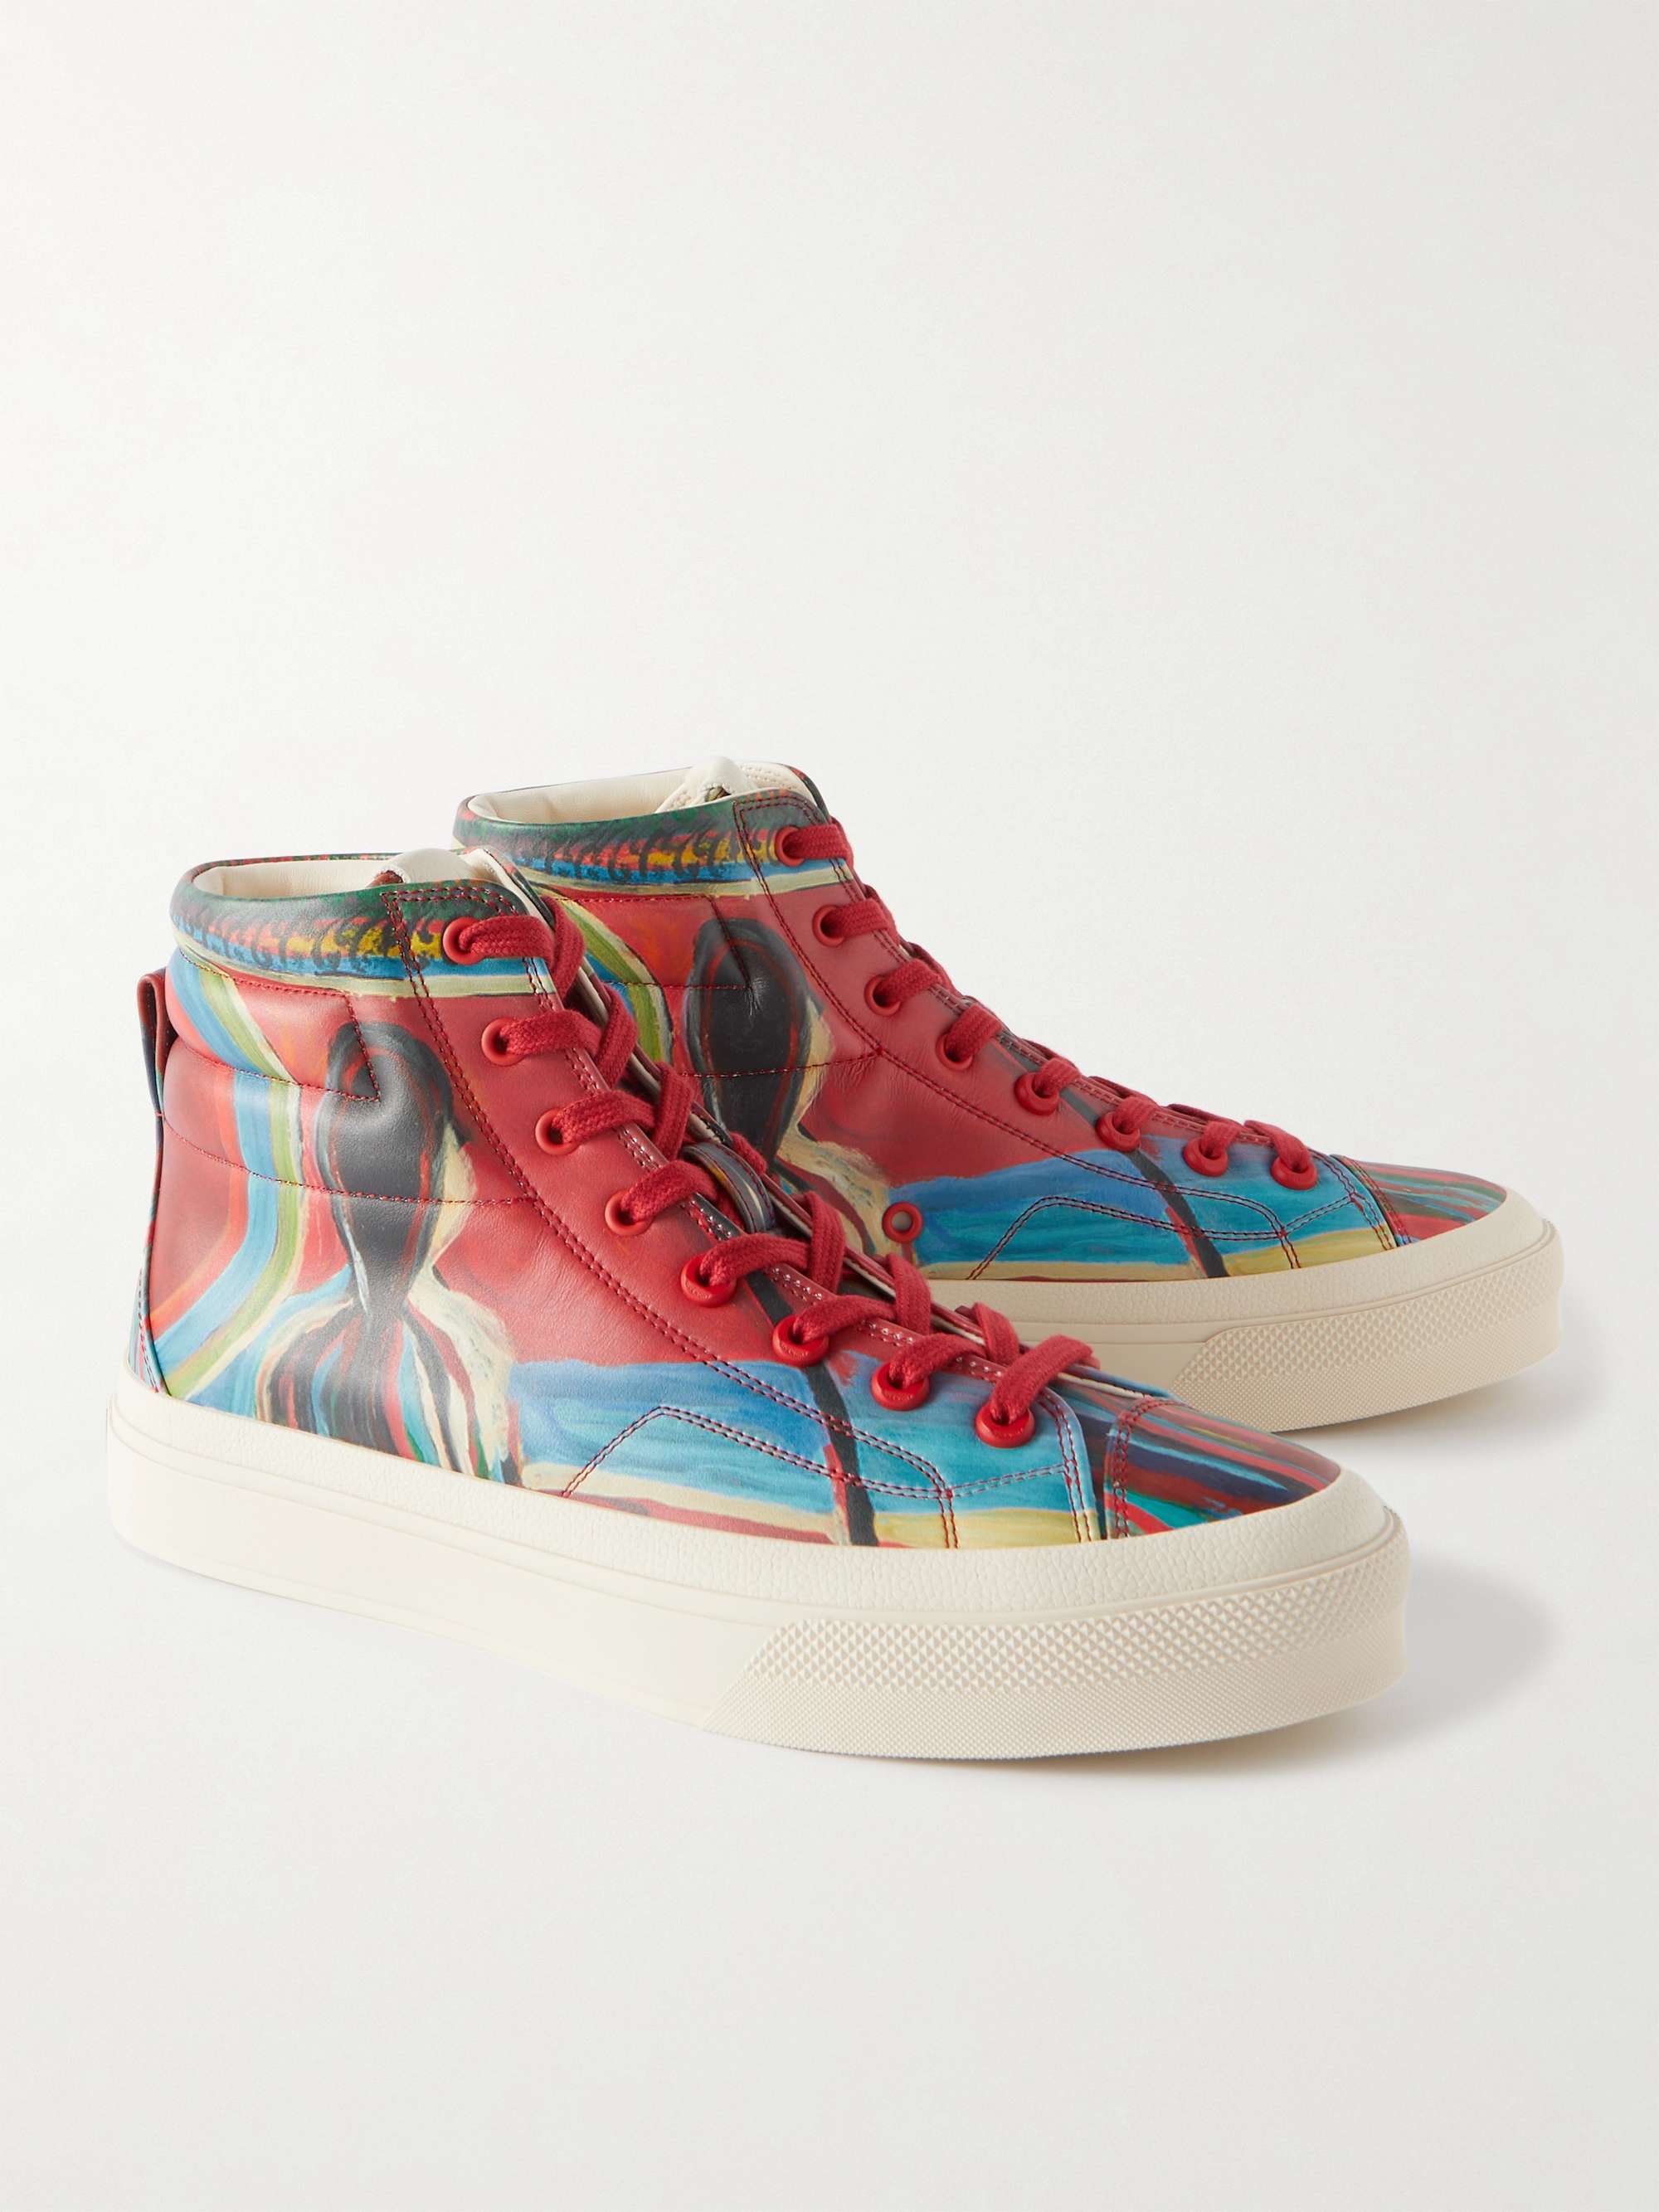 GIVENCHY + Josh Smith Printed Leather High-Top Sneakers